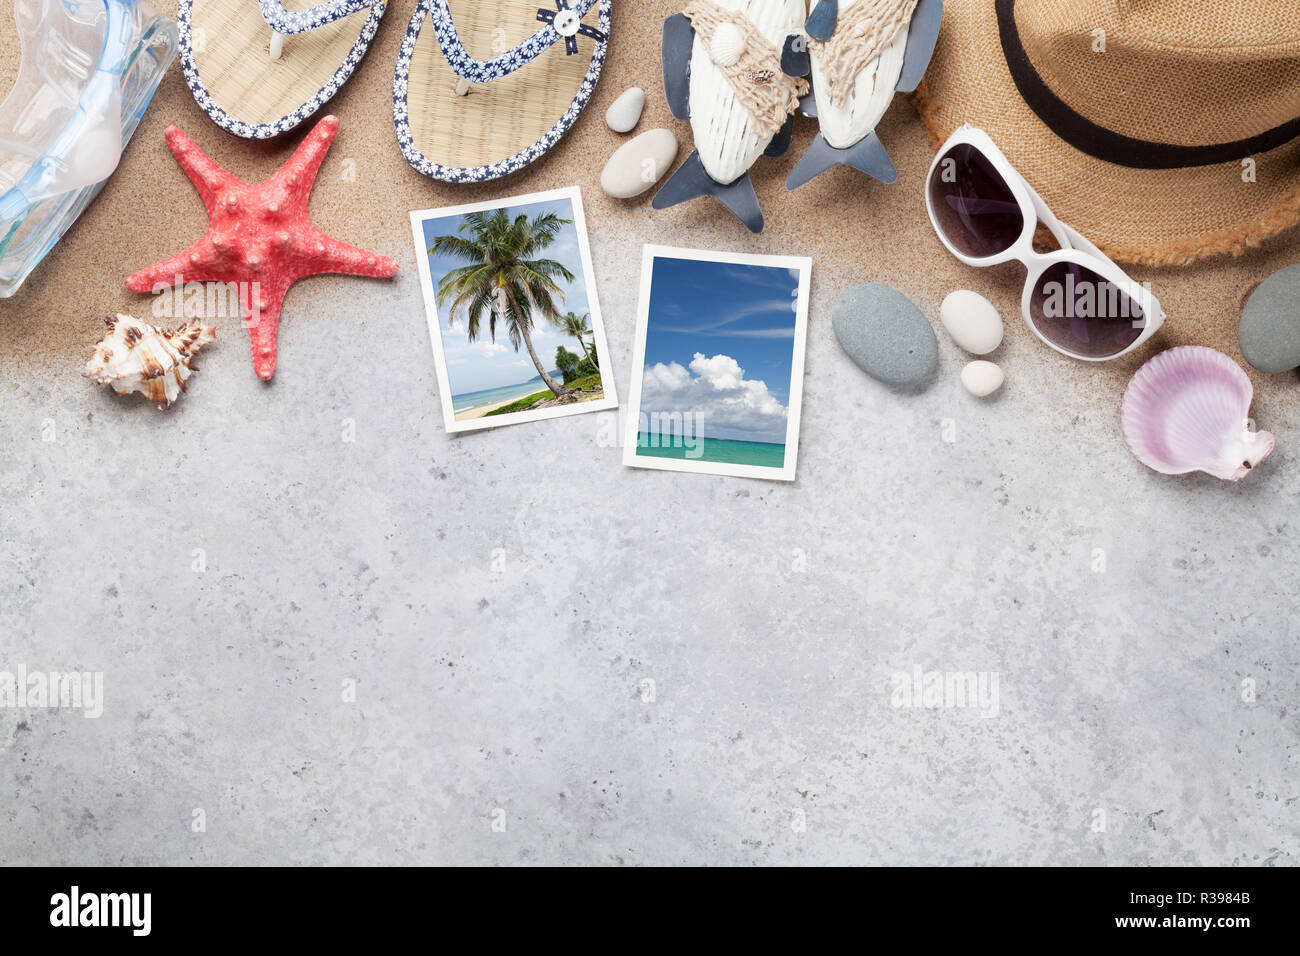 Travel vacation concept with beach hat, sunglasses and weekend photos. Top view with copy space. Flat lay. All photos taken by me Stock Photo